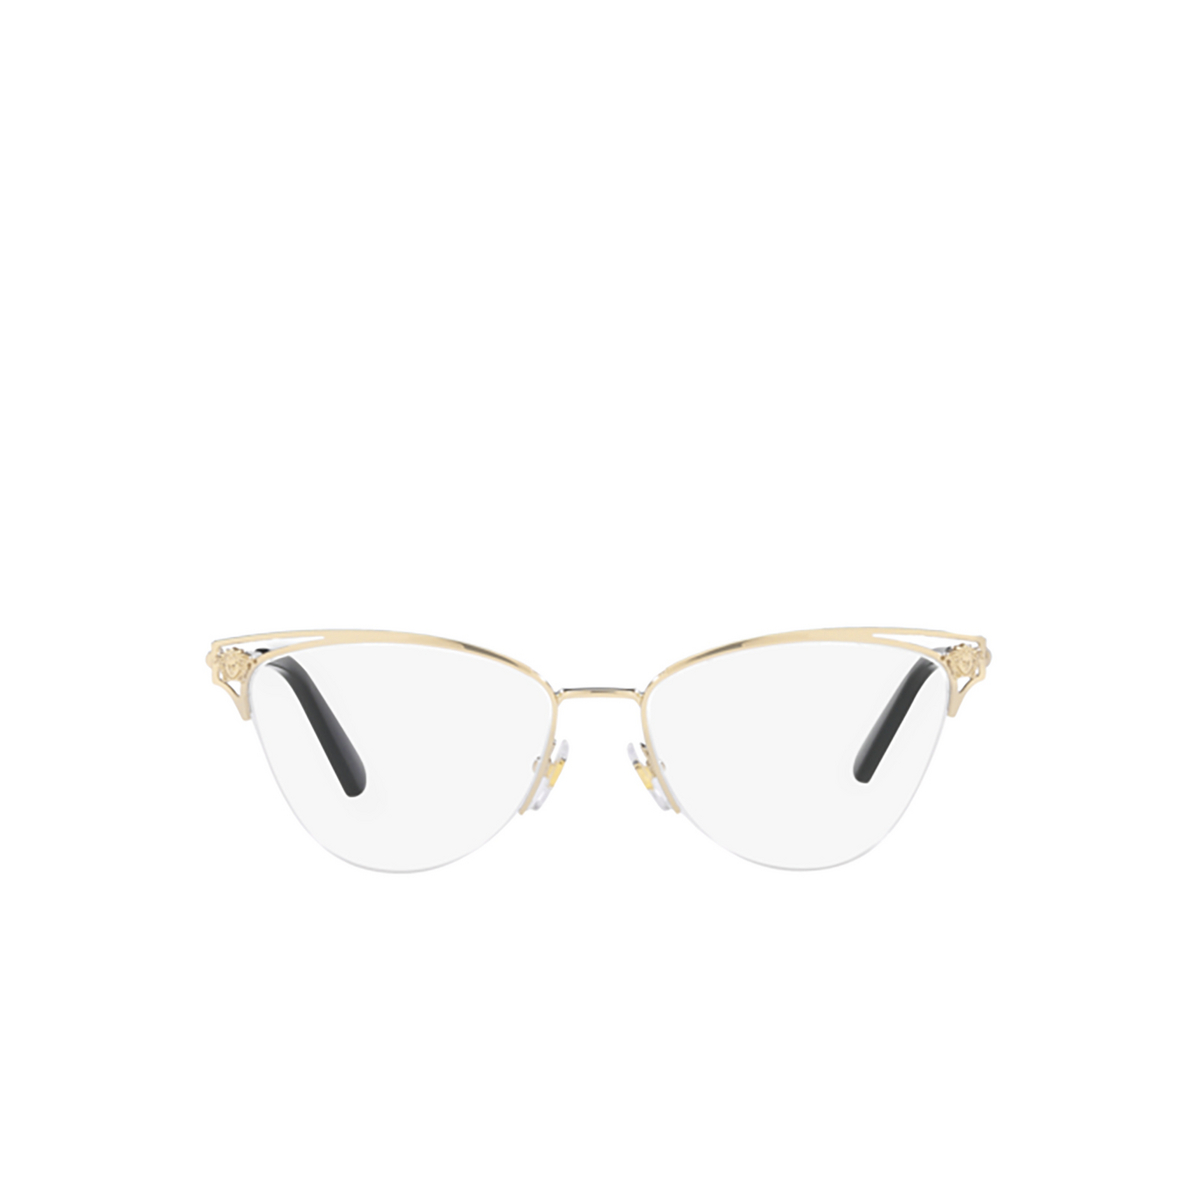 Versace VE1280 Eyeglasses 1252 Pale Gold - front view